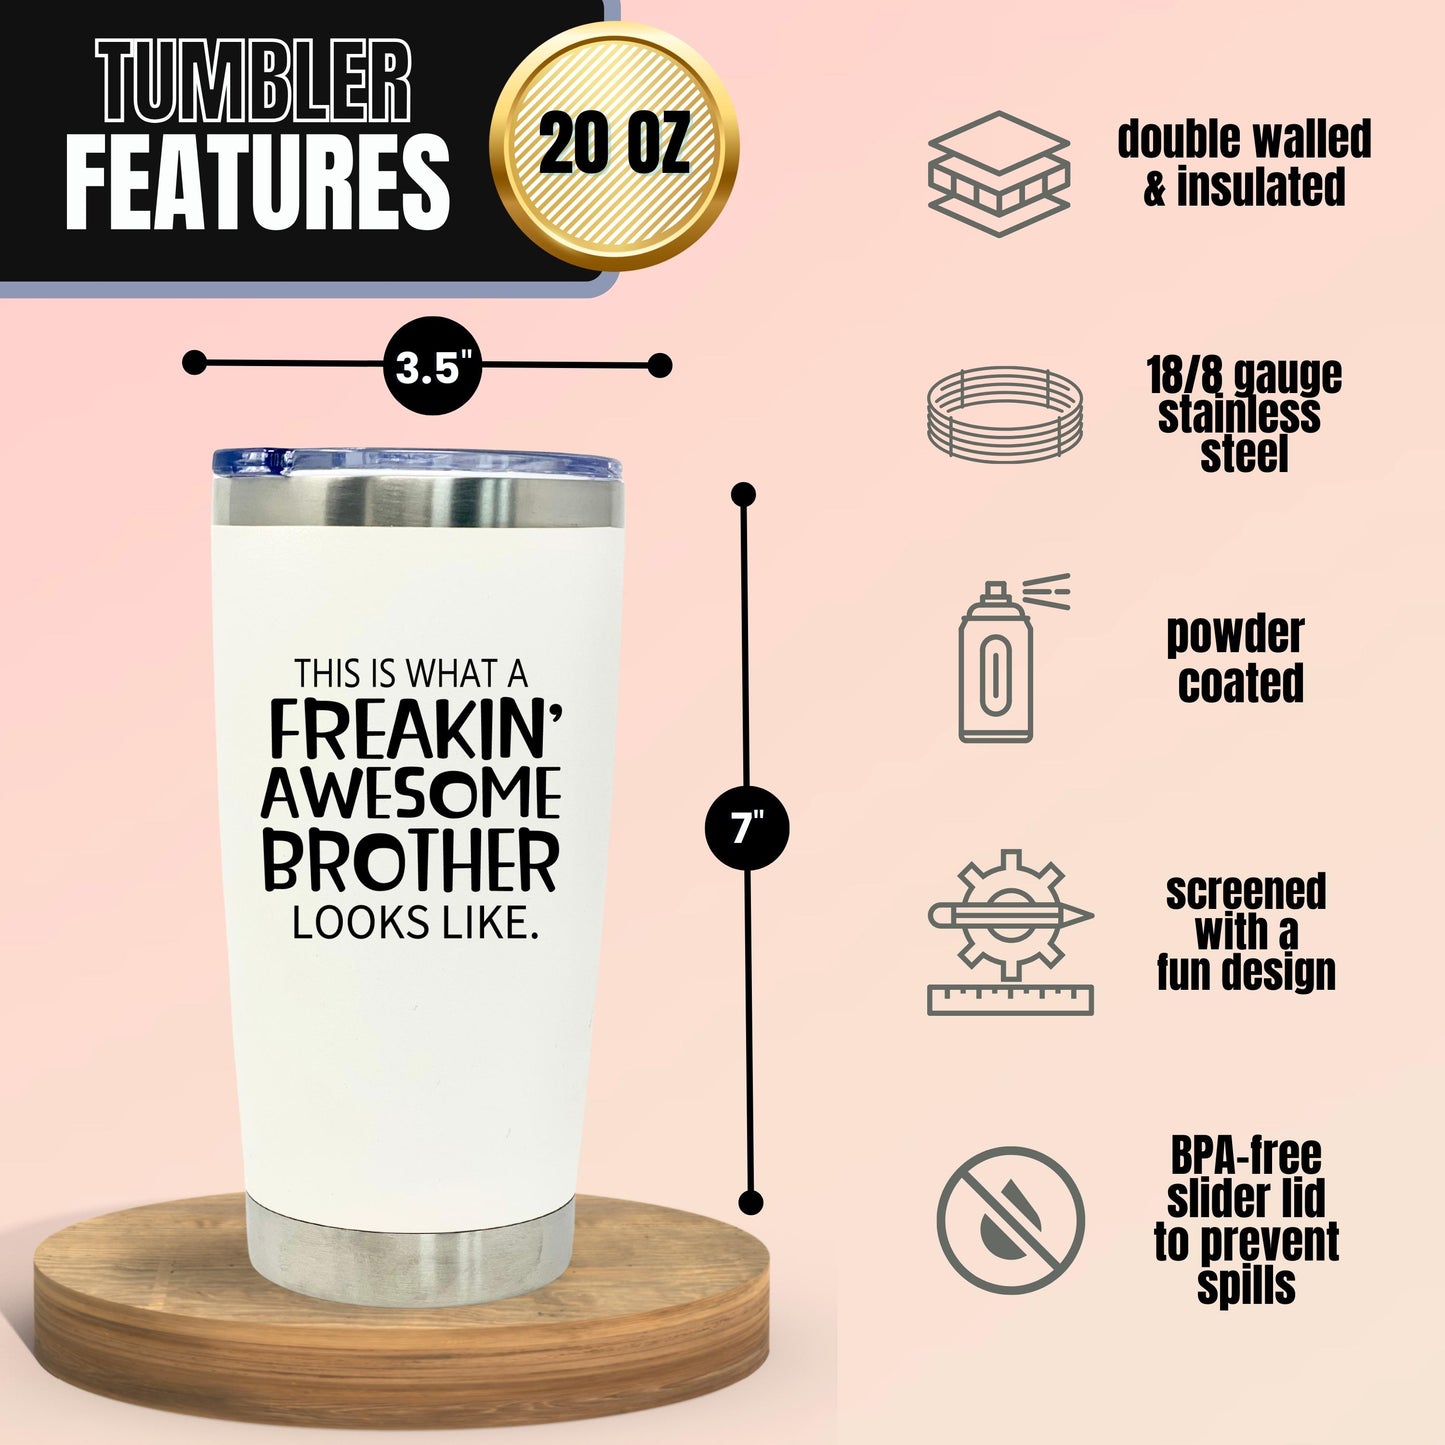 Funny Gift for Brother and Sister - Awesome Brother and Sister Tumbler Coffee Mug - Great Travel Cup Gifts for Siblings, Christmas Birthday Presents for Brother and Sister